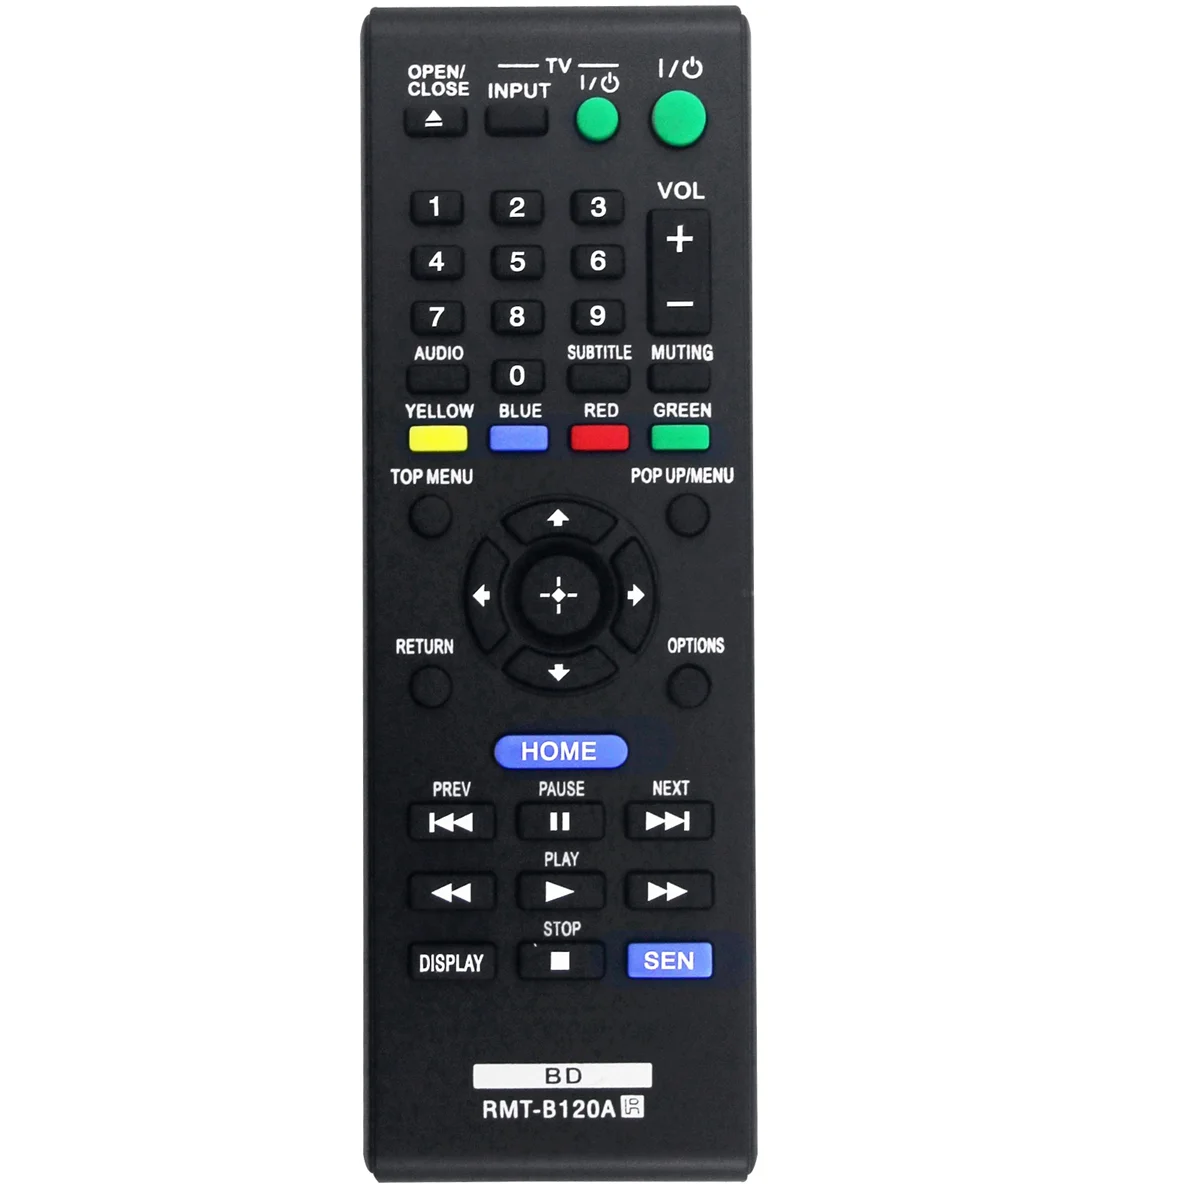 

RMT-B120A Replace Remote Control for Sony 3D Blu-Ray Disc DVD Player BDP-S5100 BDP-S1100 BDP-S3100 BDP-S190 BDP-S590